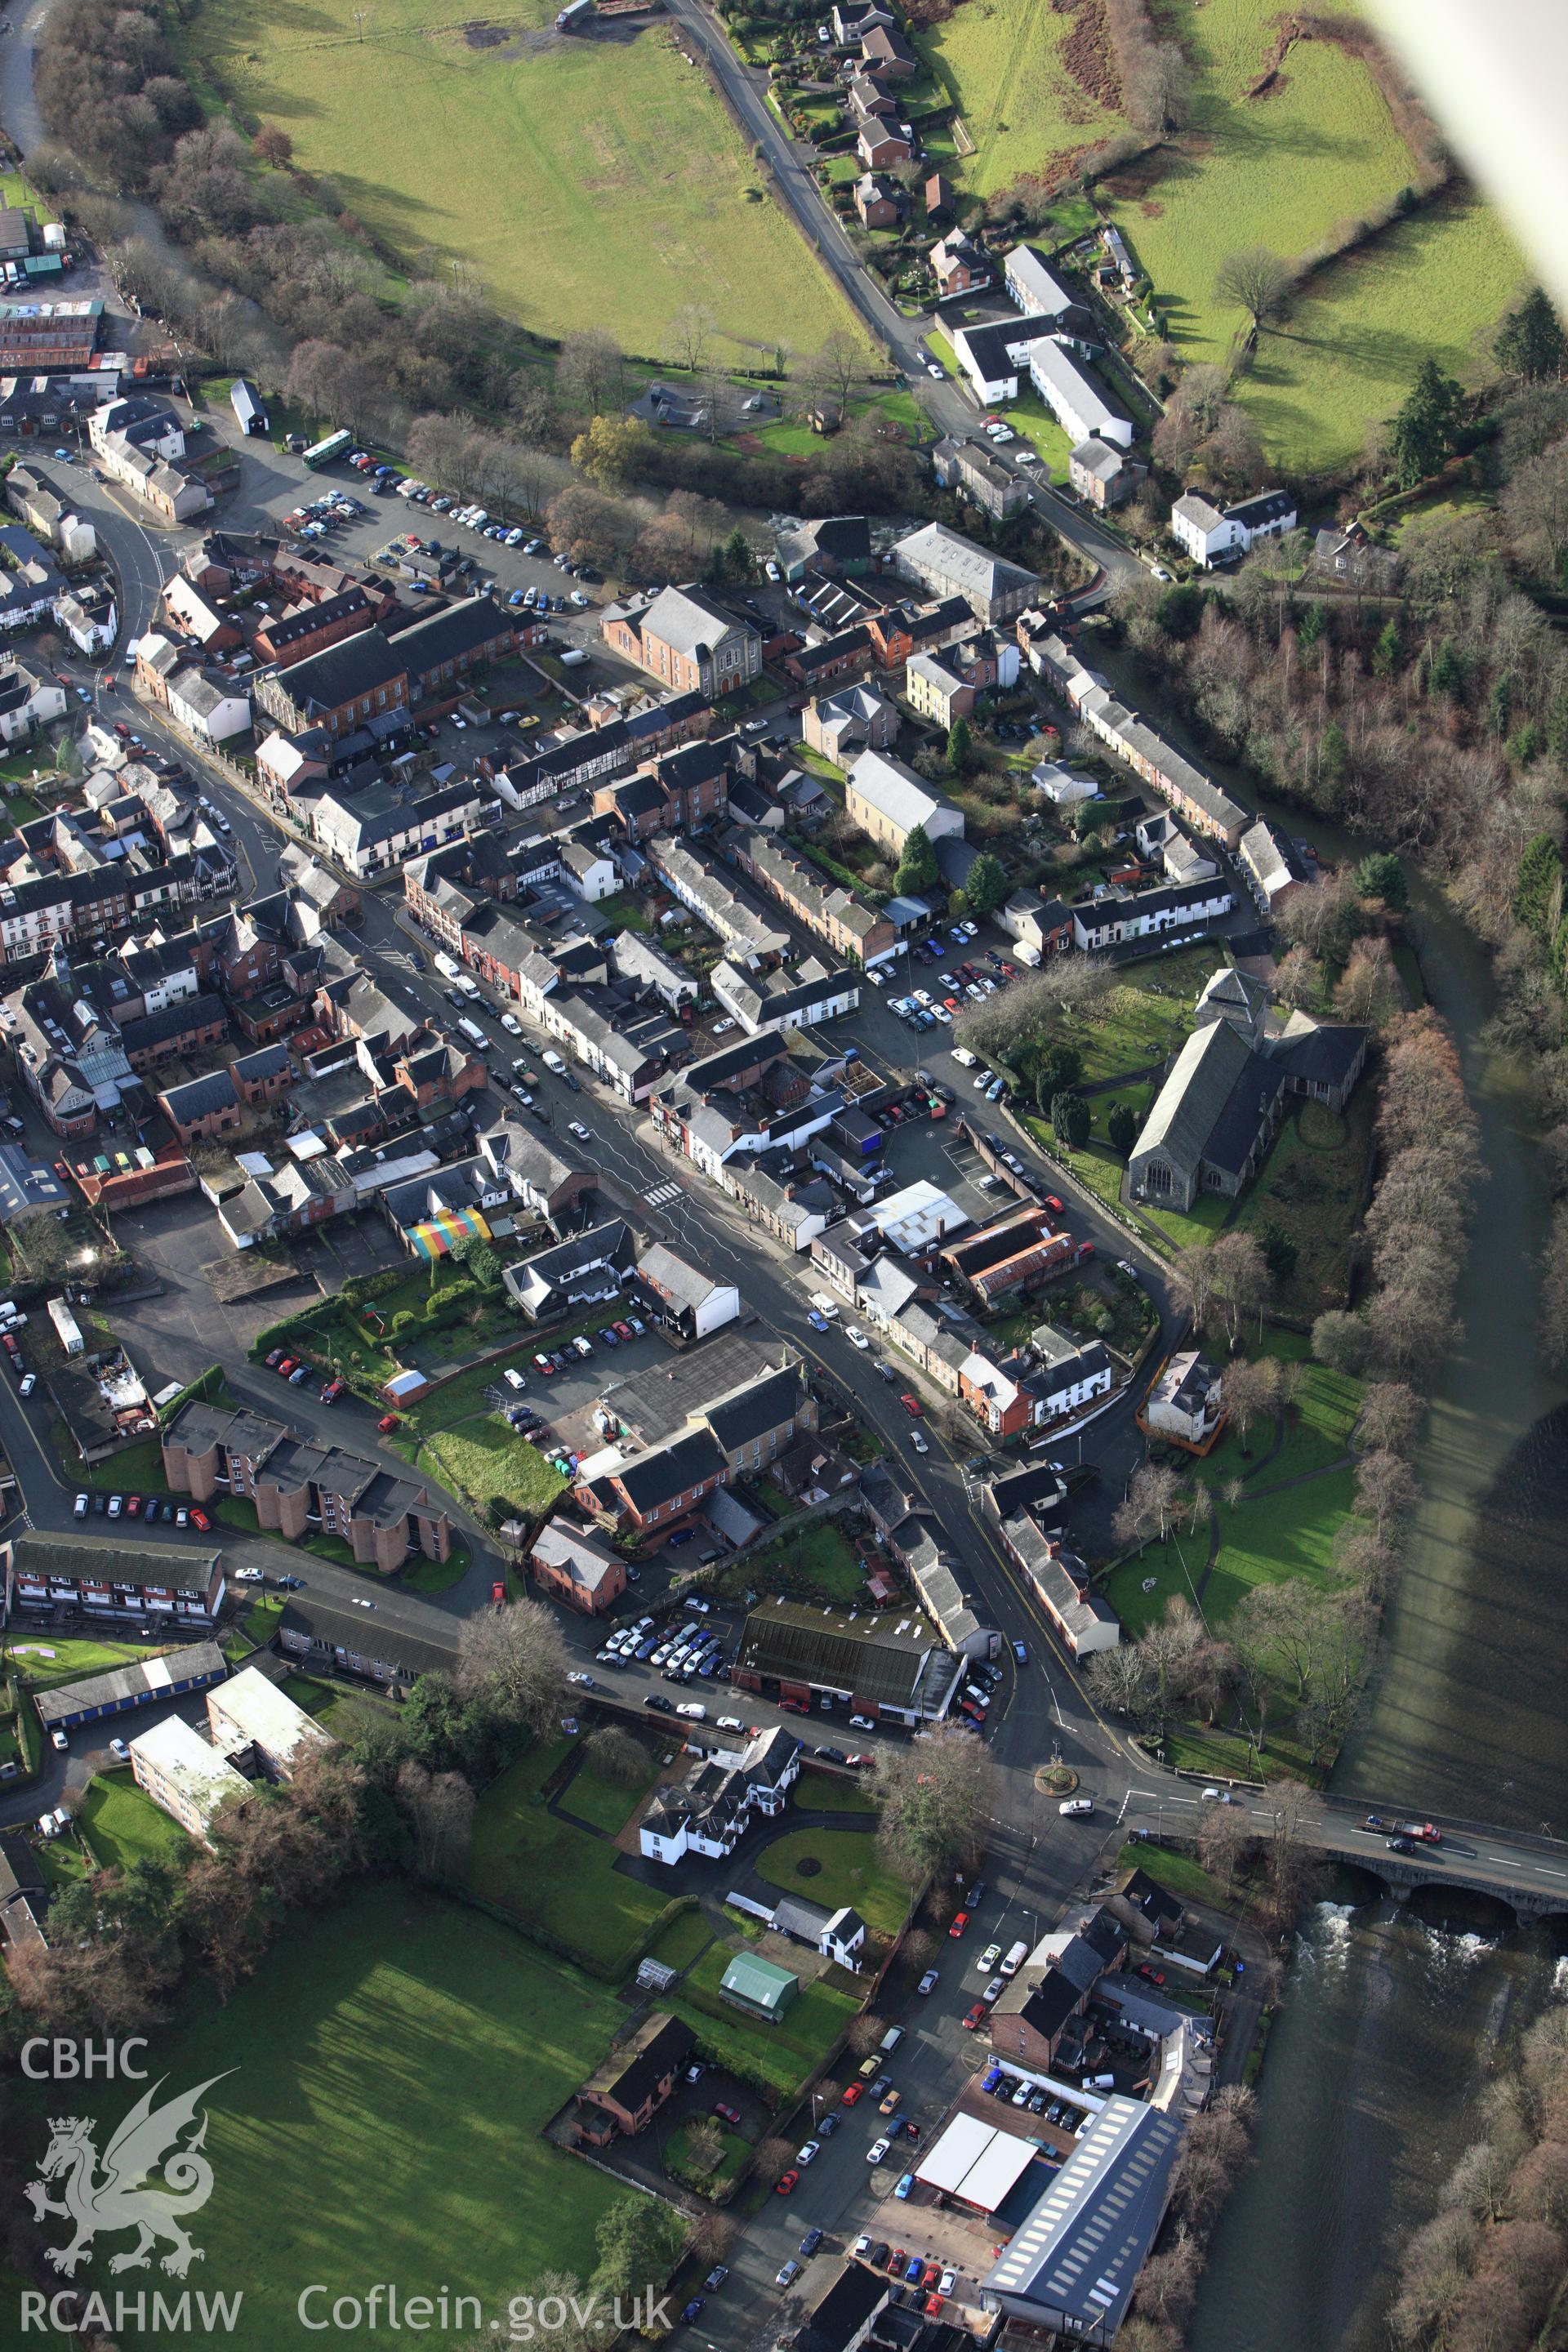 RCAHMW colour oblique aerial photograph of Llanidloes. Taken on 10 December 2009 by Toby Driver